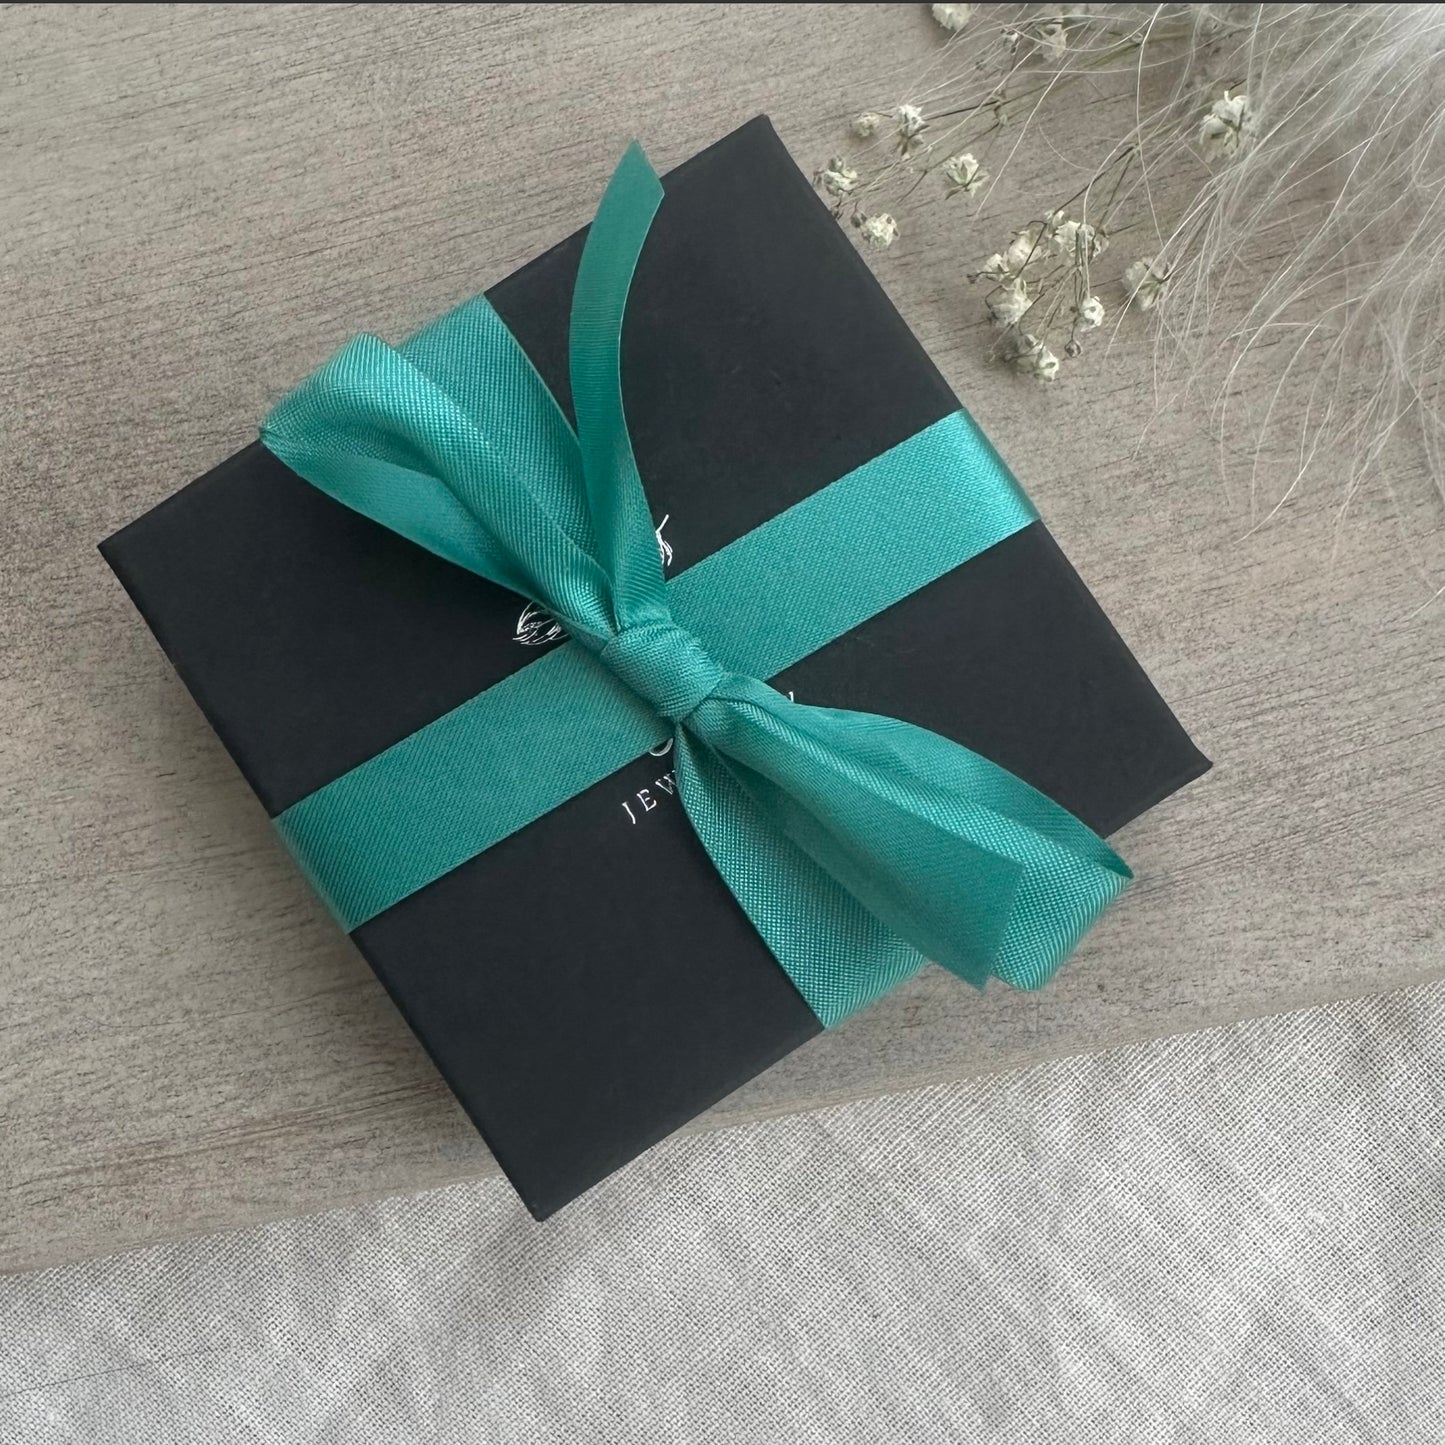 a black and blue gift box with a green ribbon